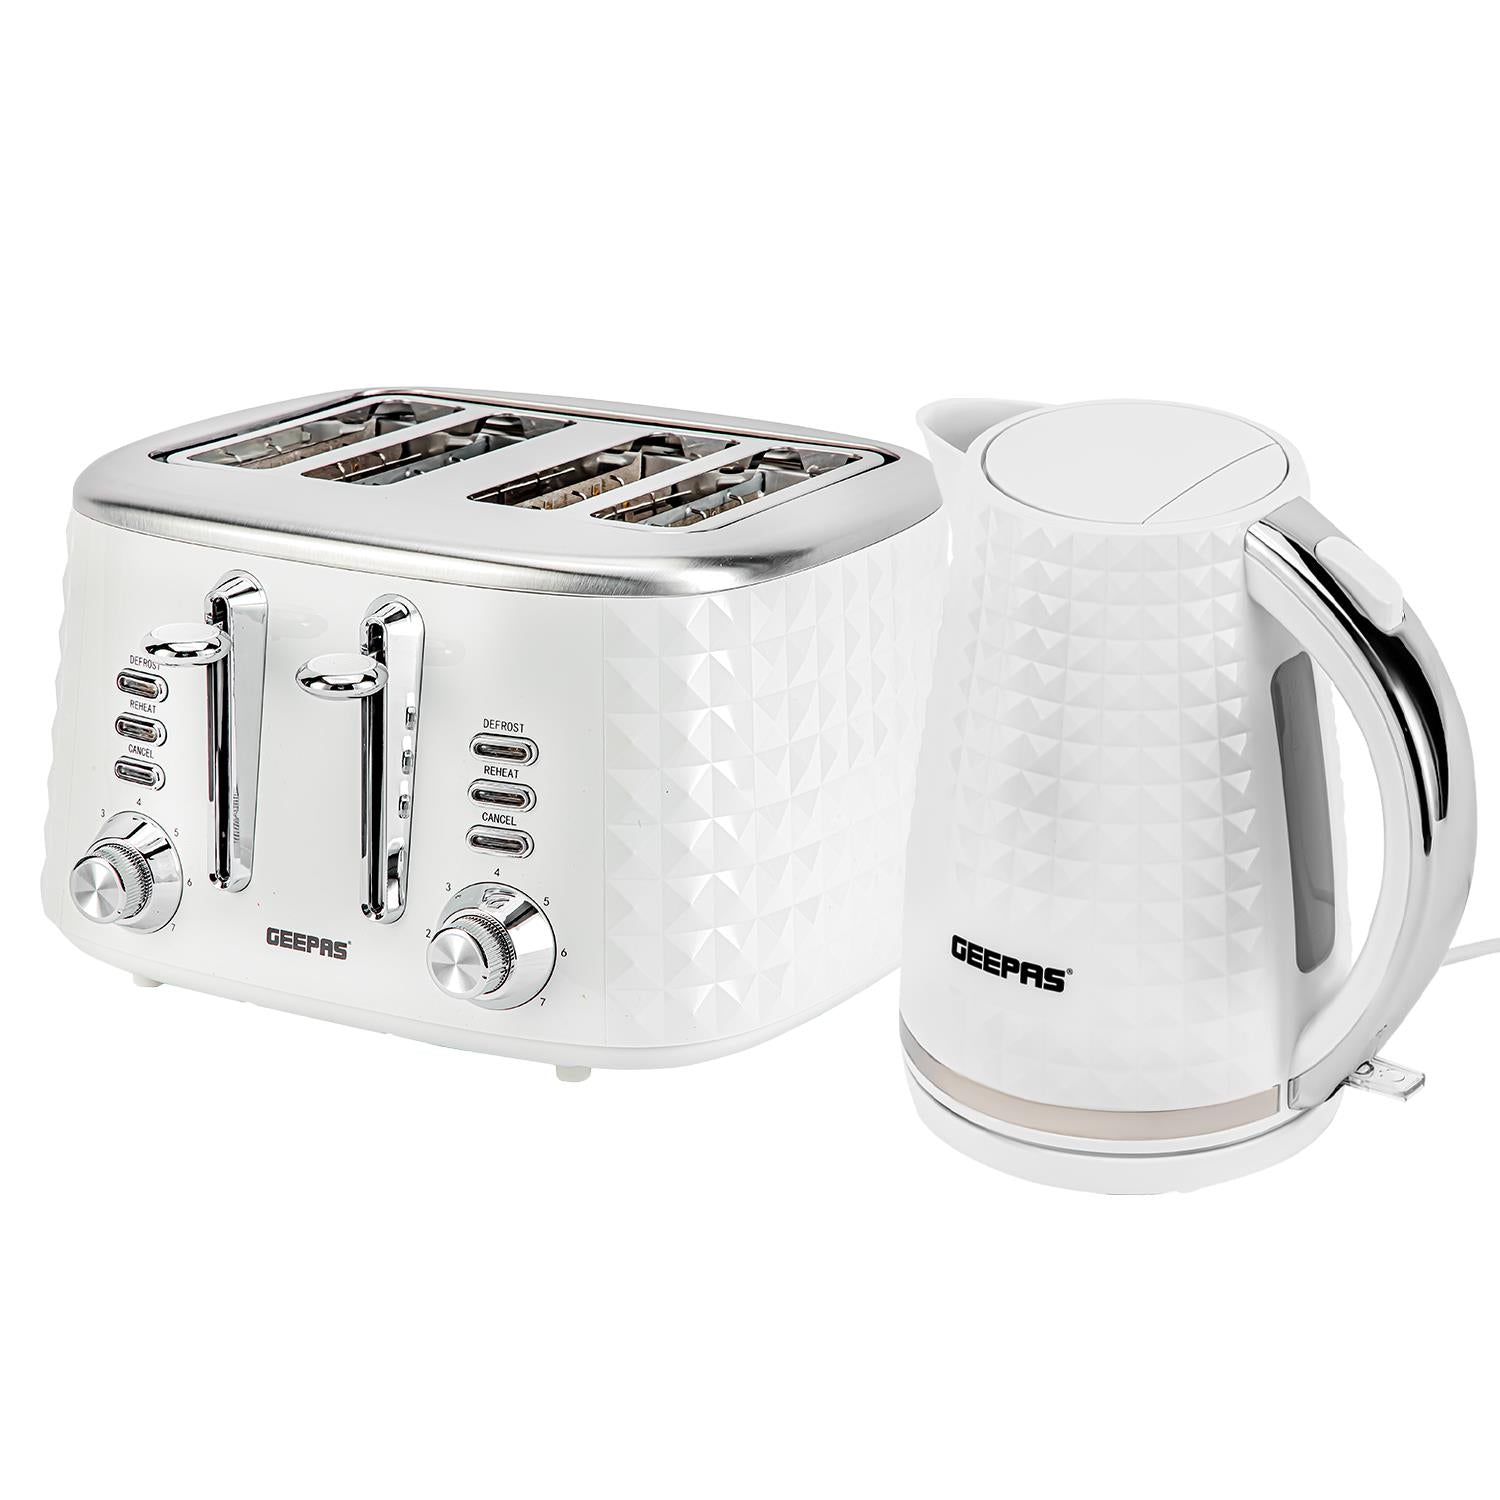 2200W Textured 1.7L Electric Kettle & 4-Slice Toaster Set